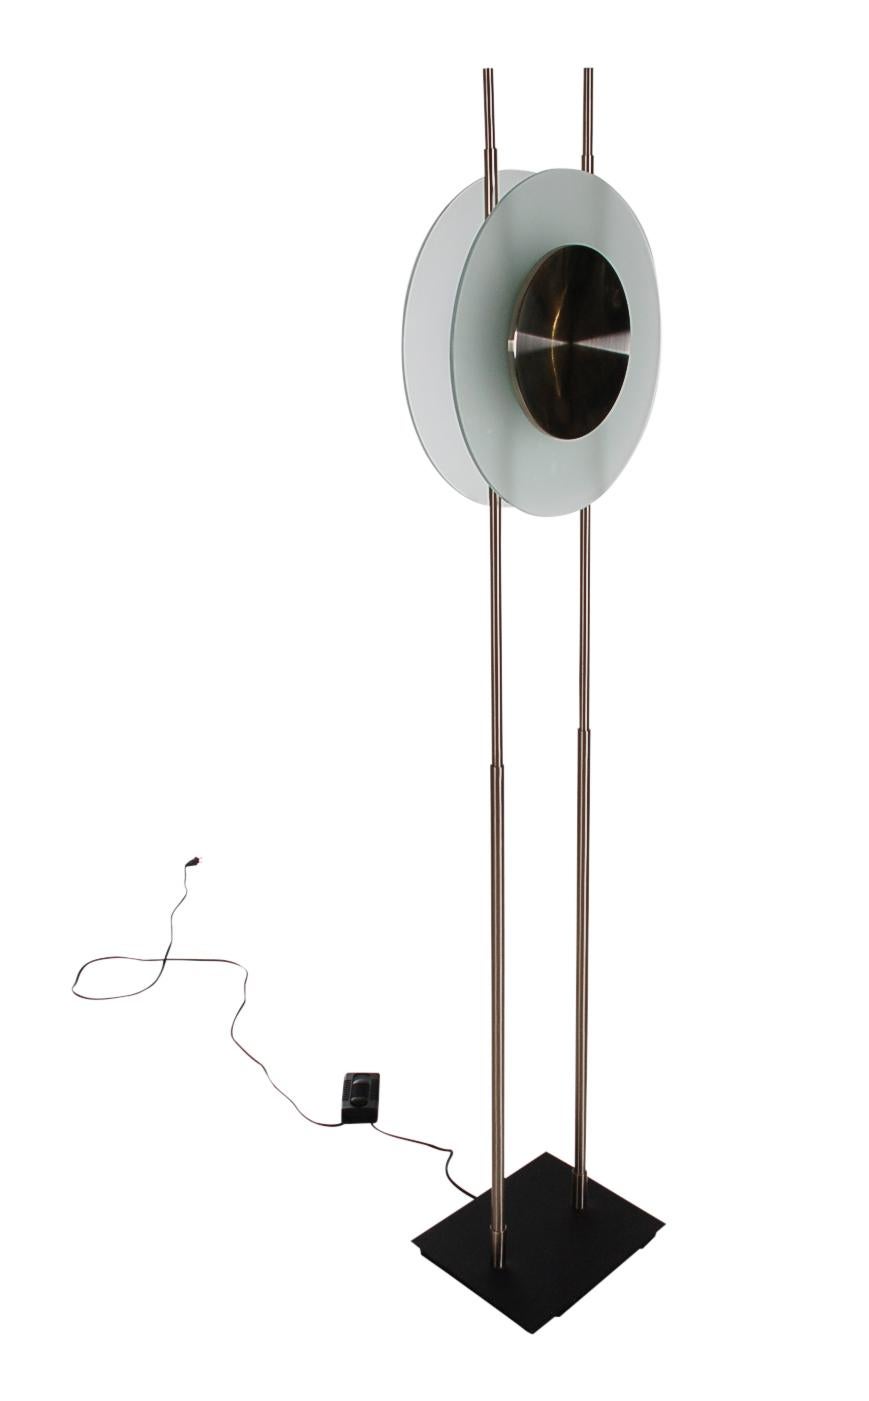 Late 20th Century Midcentury Italian Postmodern Steel & Frosted Glass Floor Lamp after Sottsass For Sale